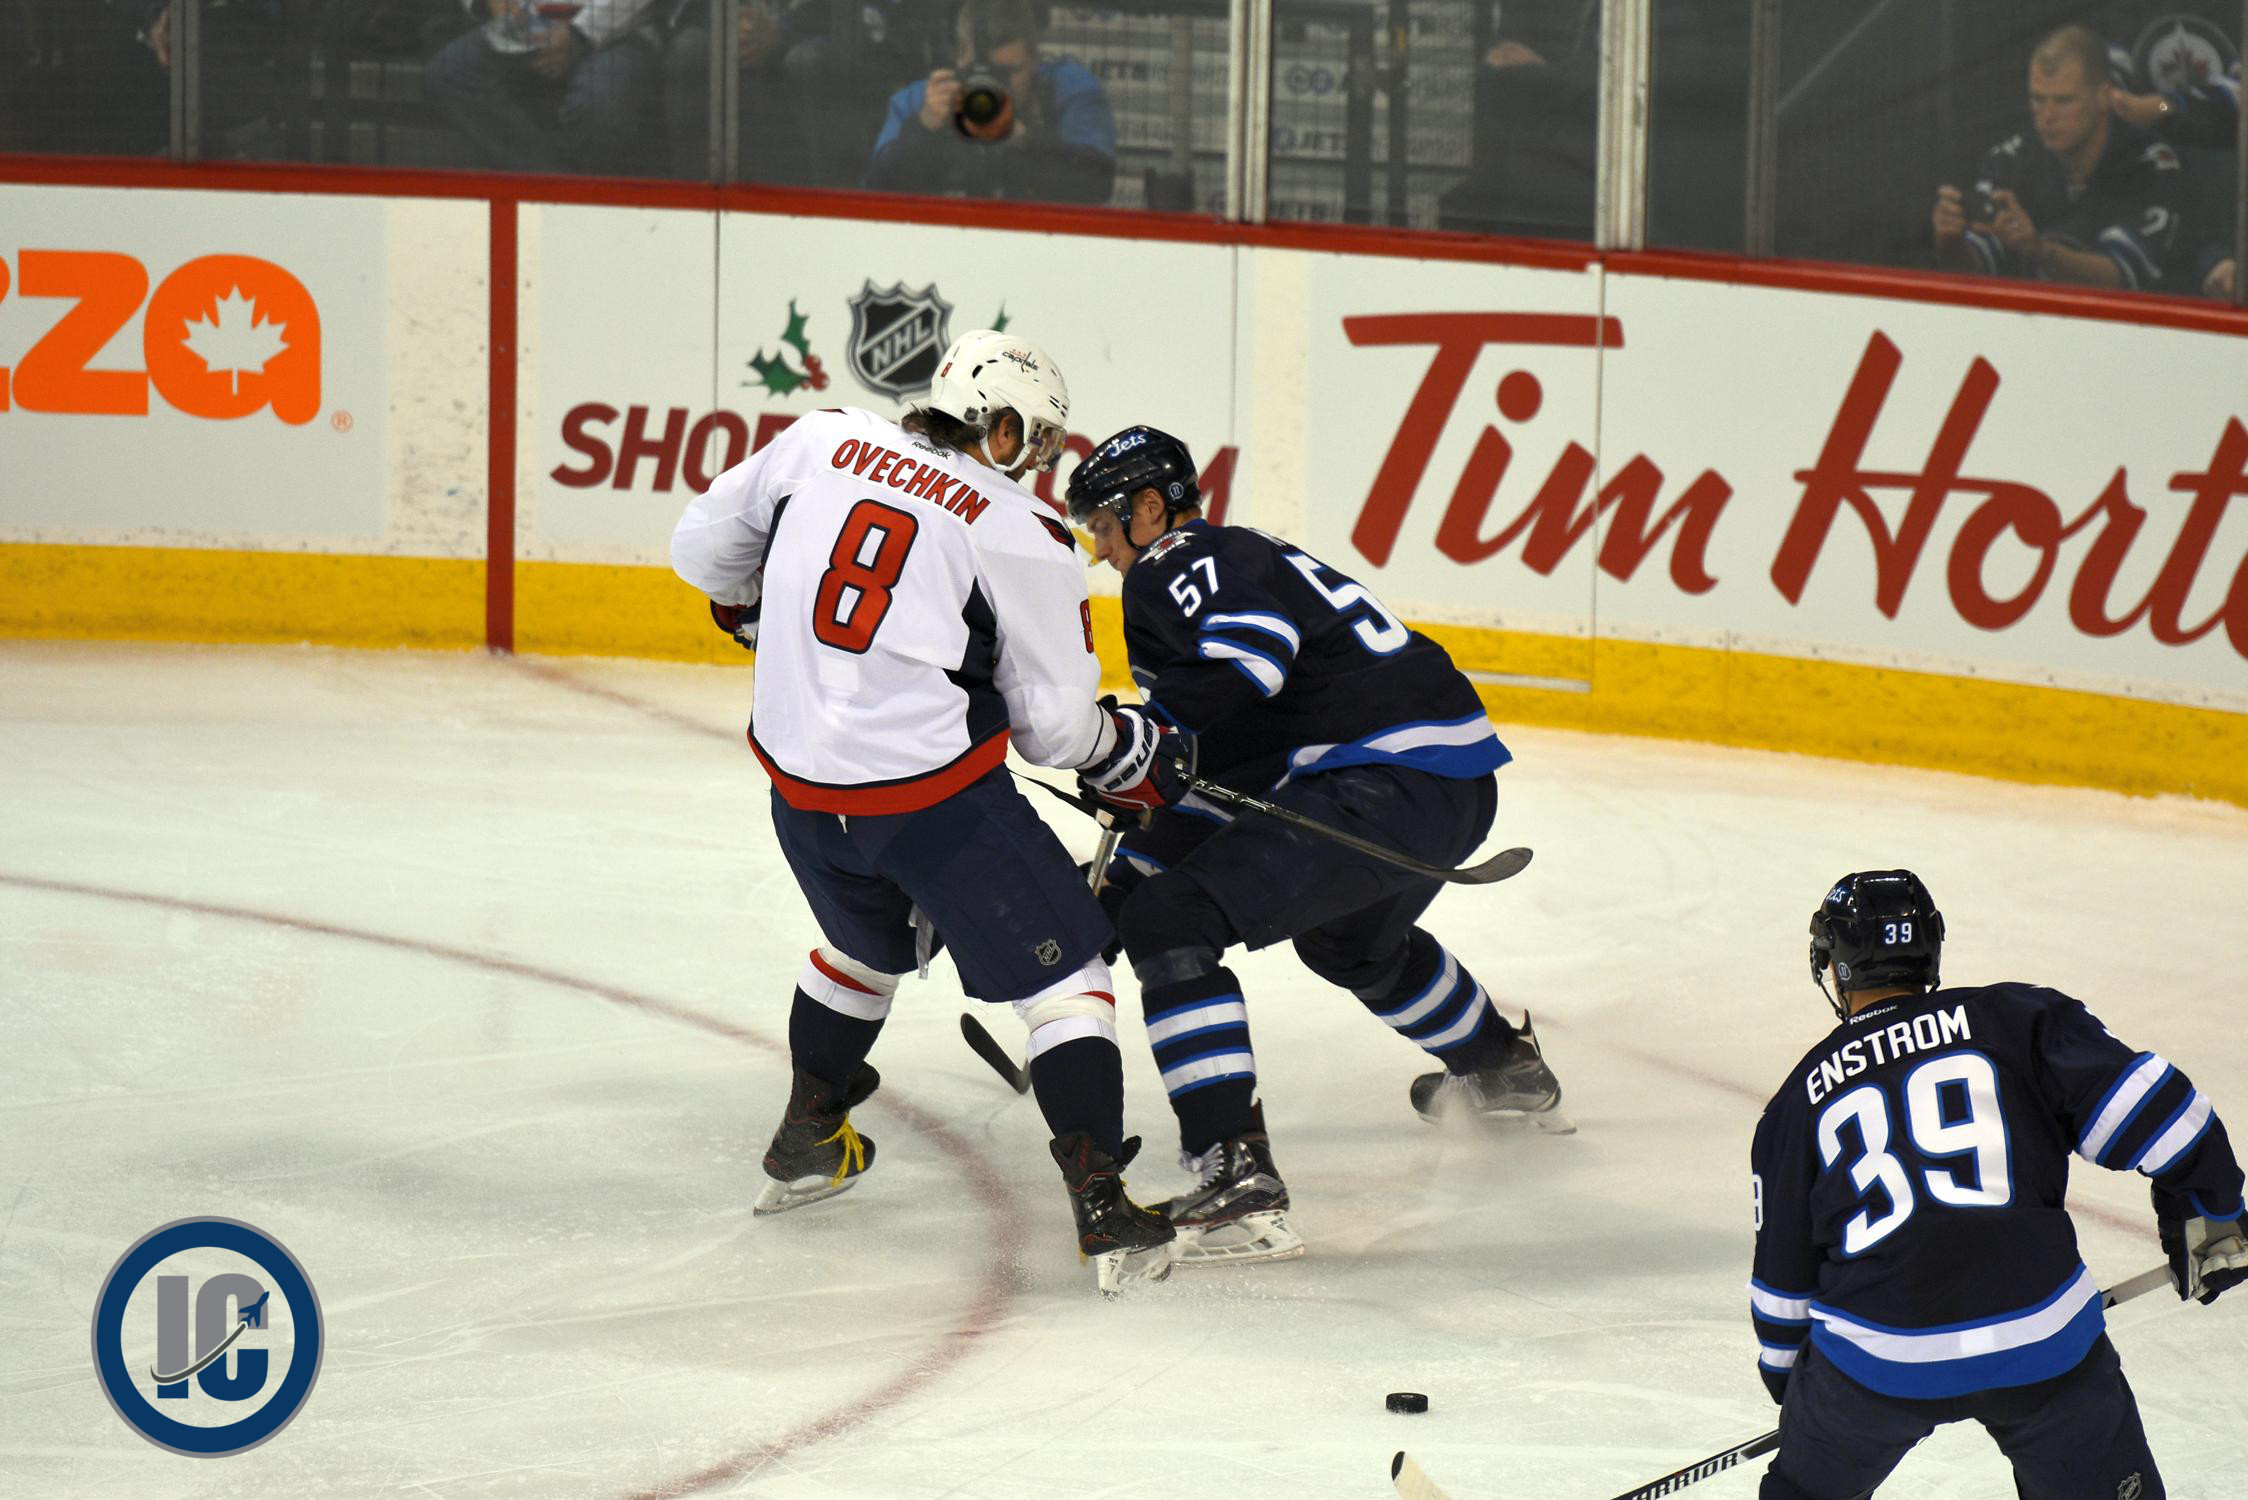 Myers and Enstrom